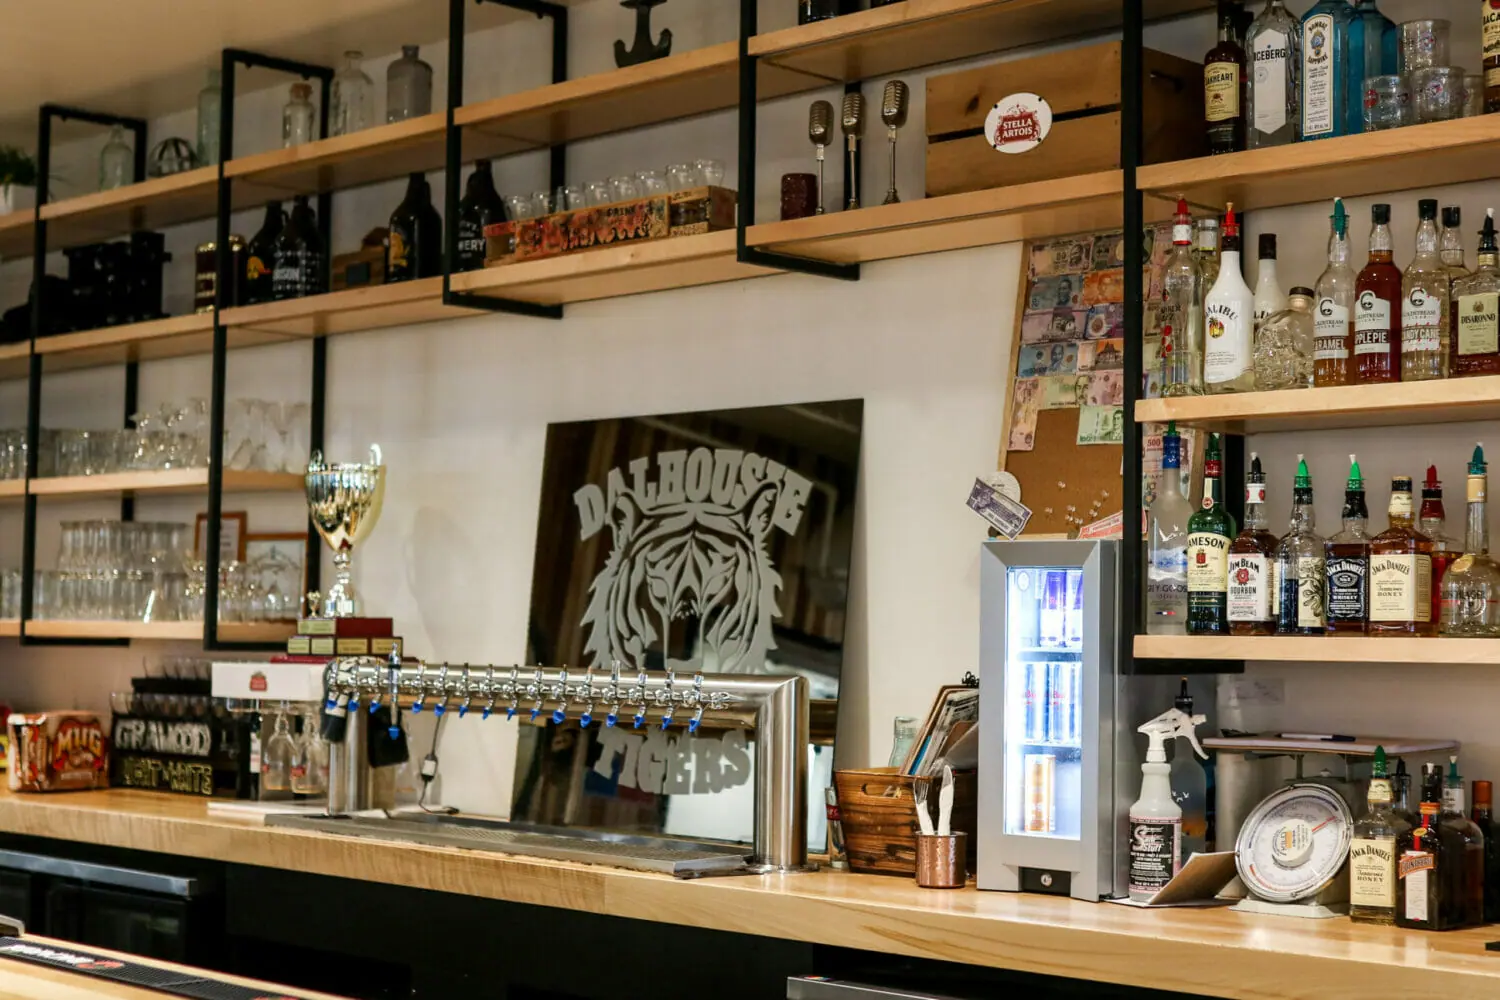 In this image: The Grawood's bar.